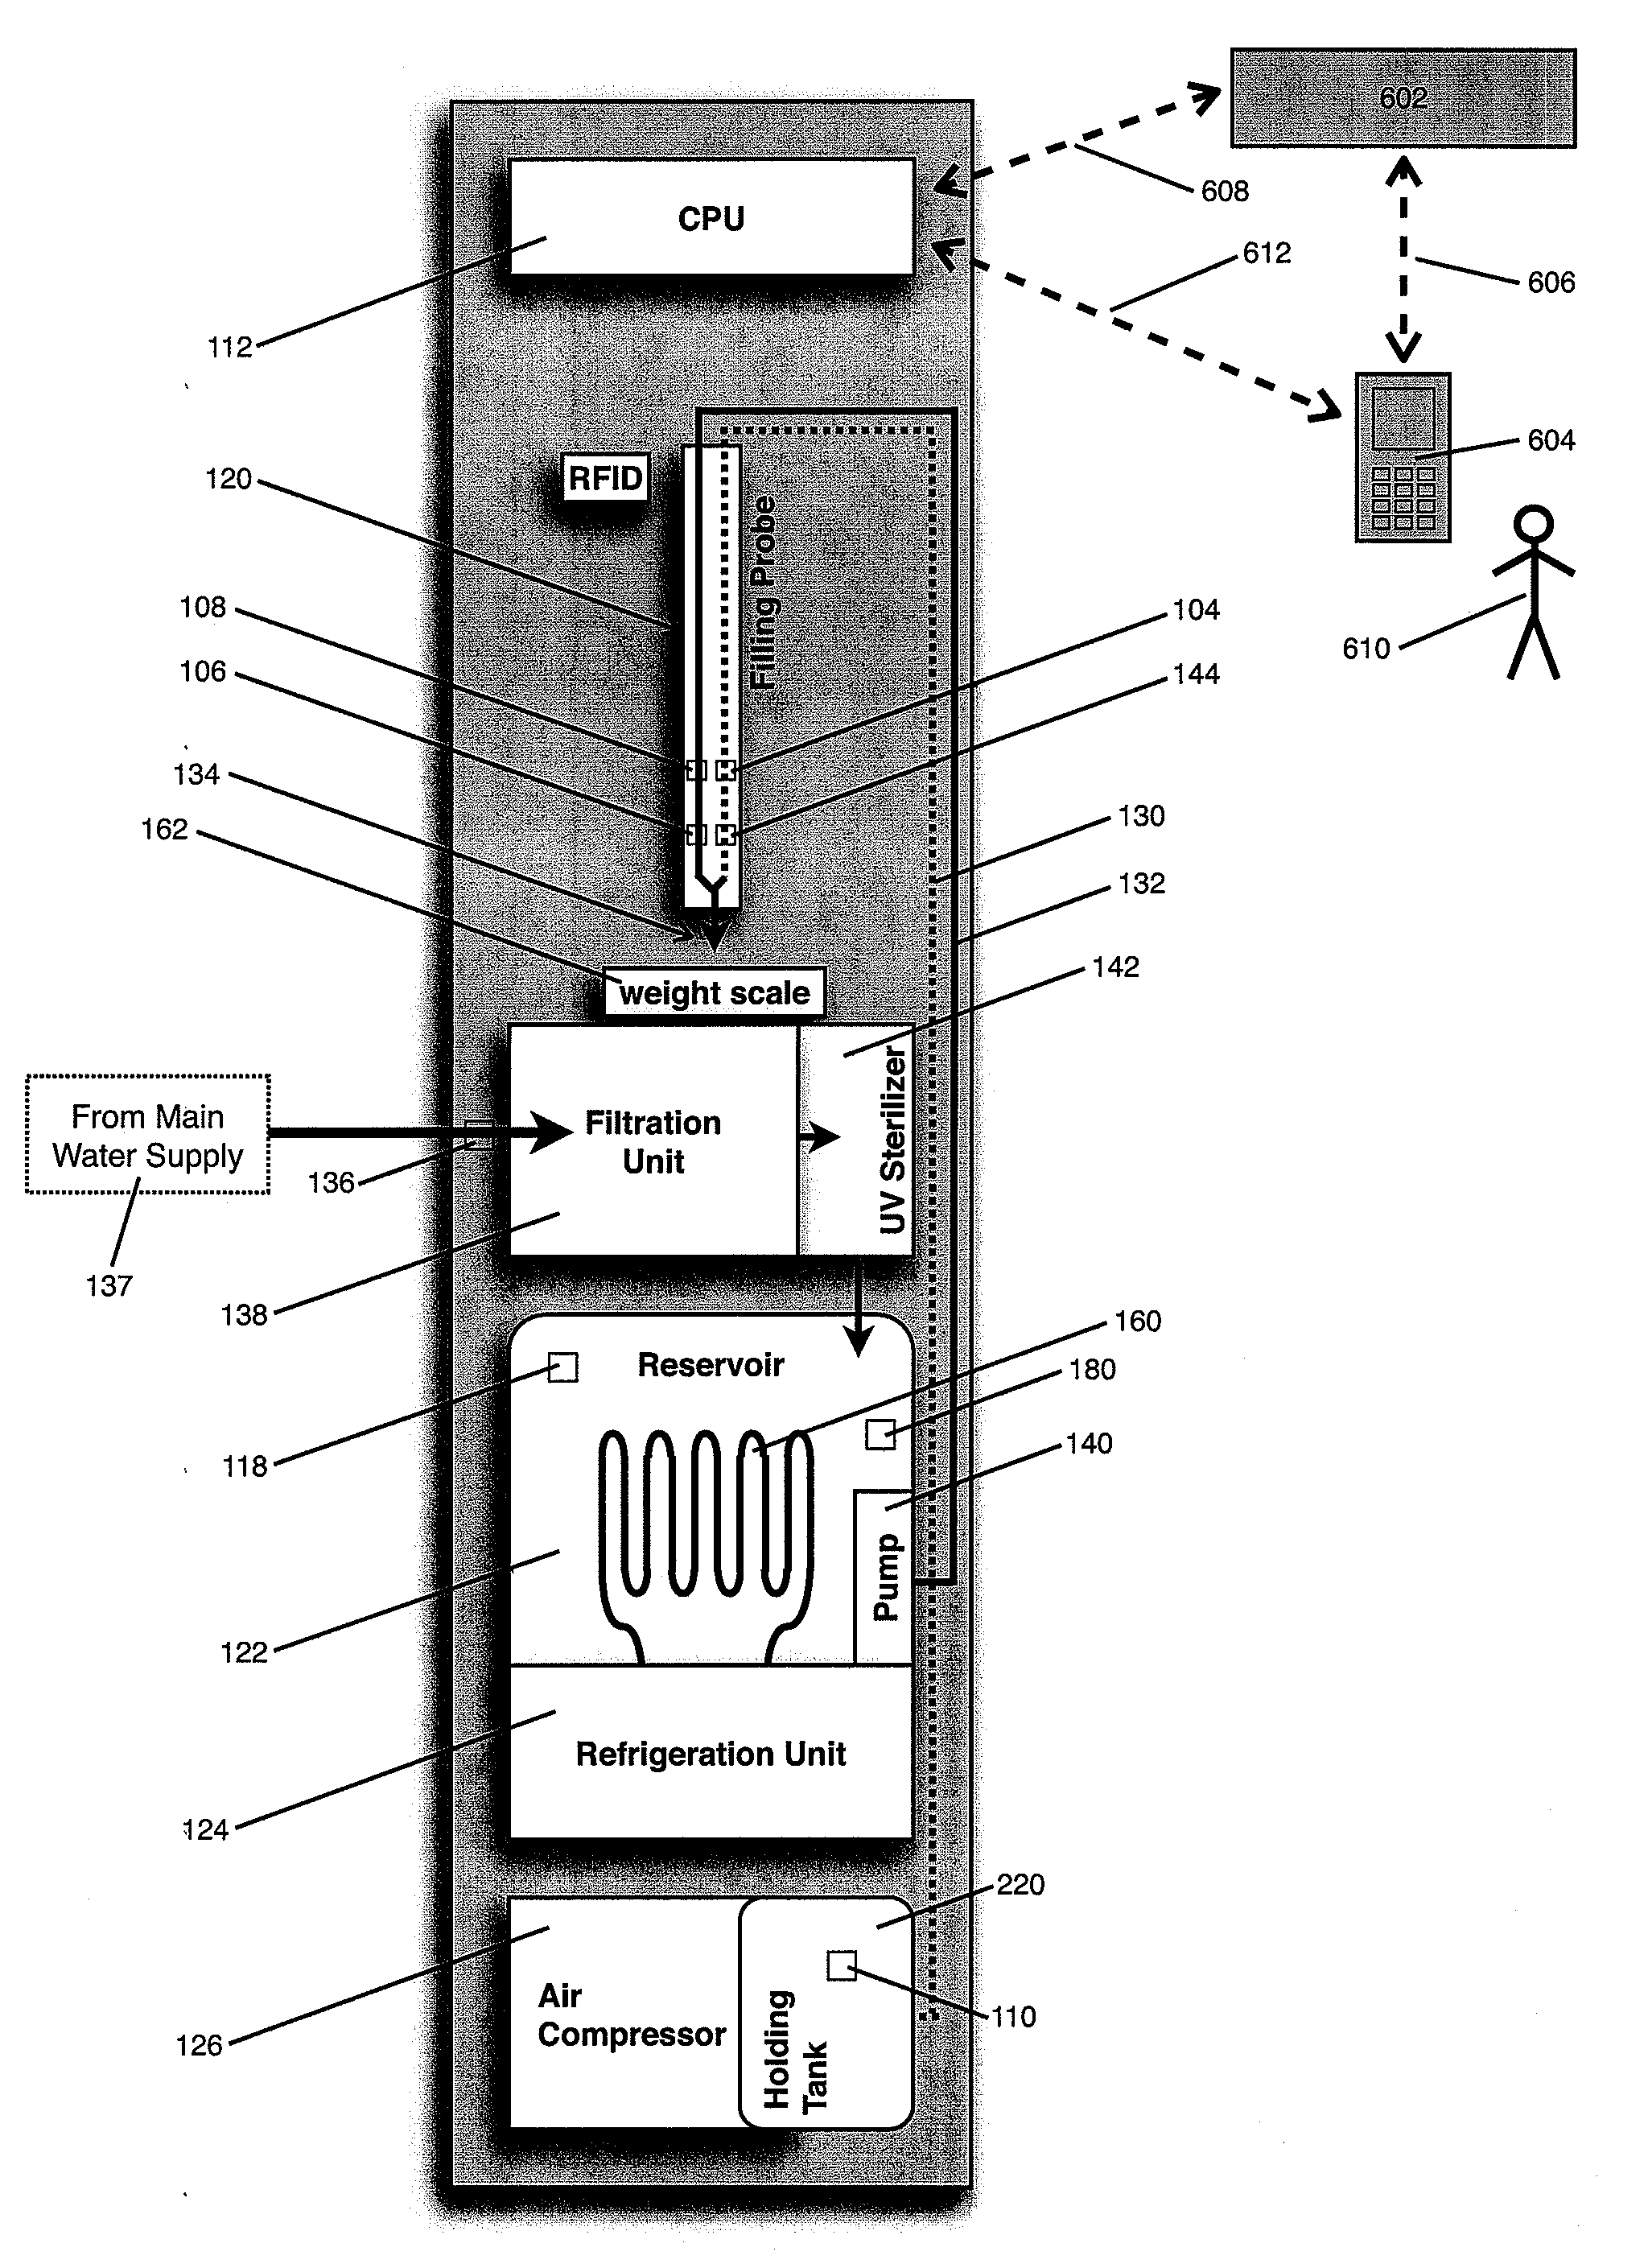 Apparatus and system for liquid dispensing and storage